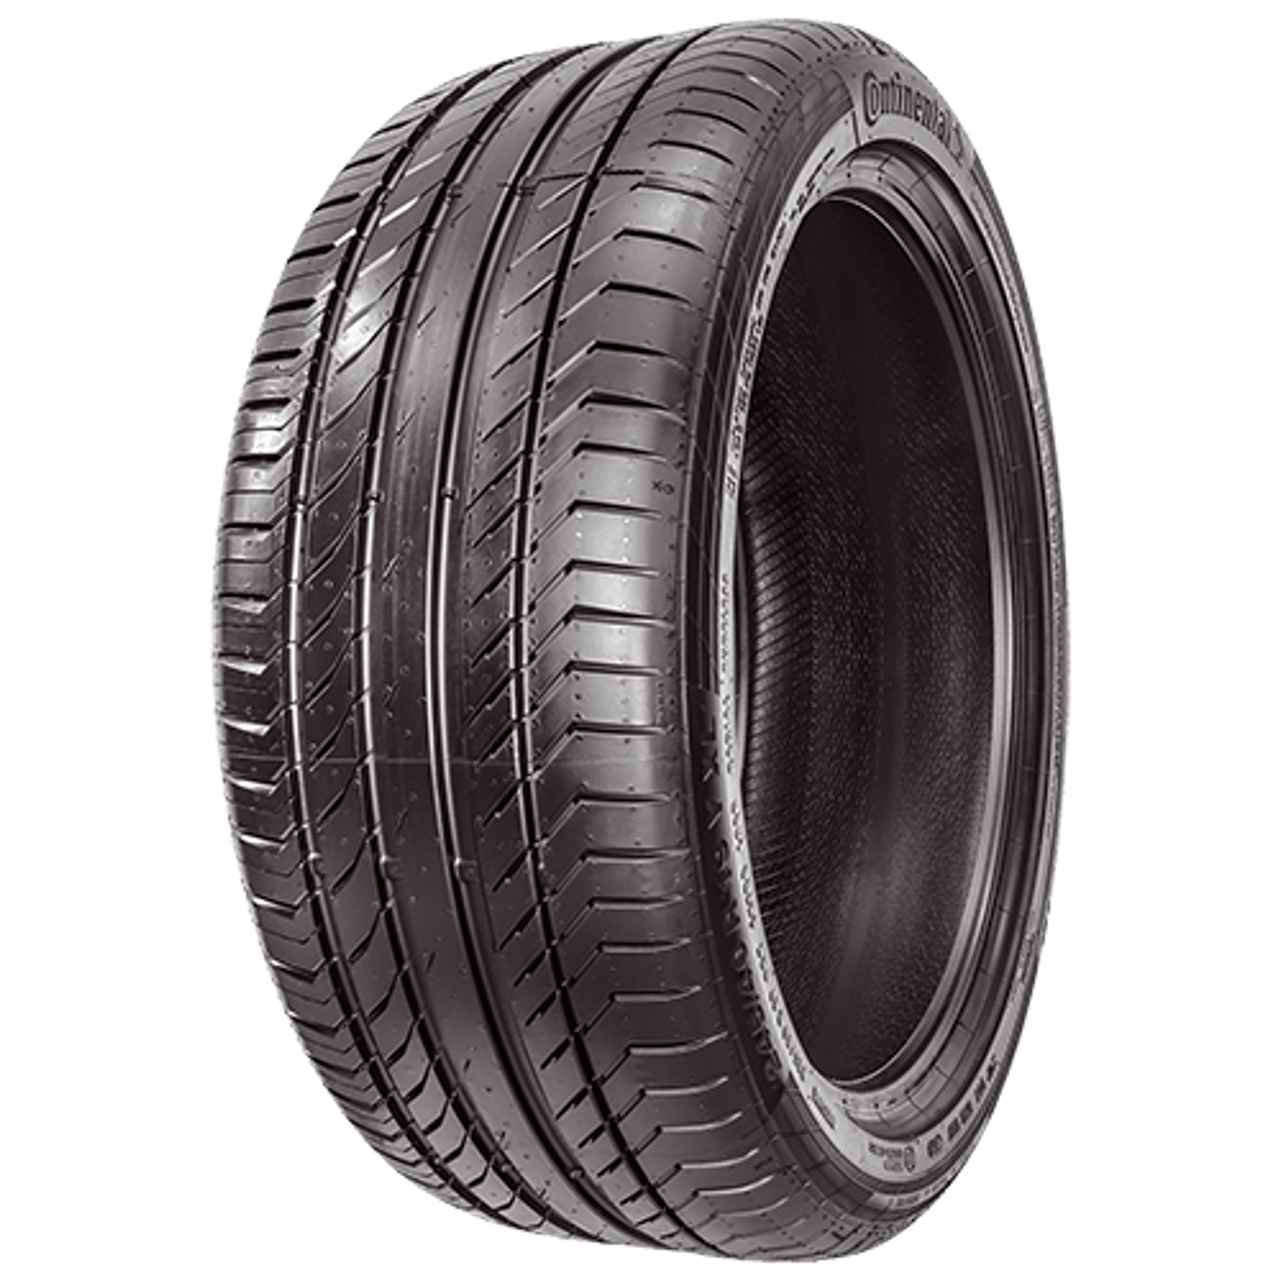 CONTINENTAL CONTISPORTCONTACT 5 (MO) 225/45R17 91W FR